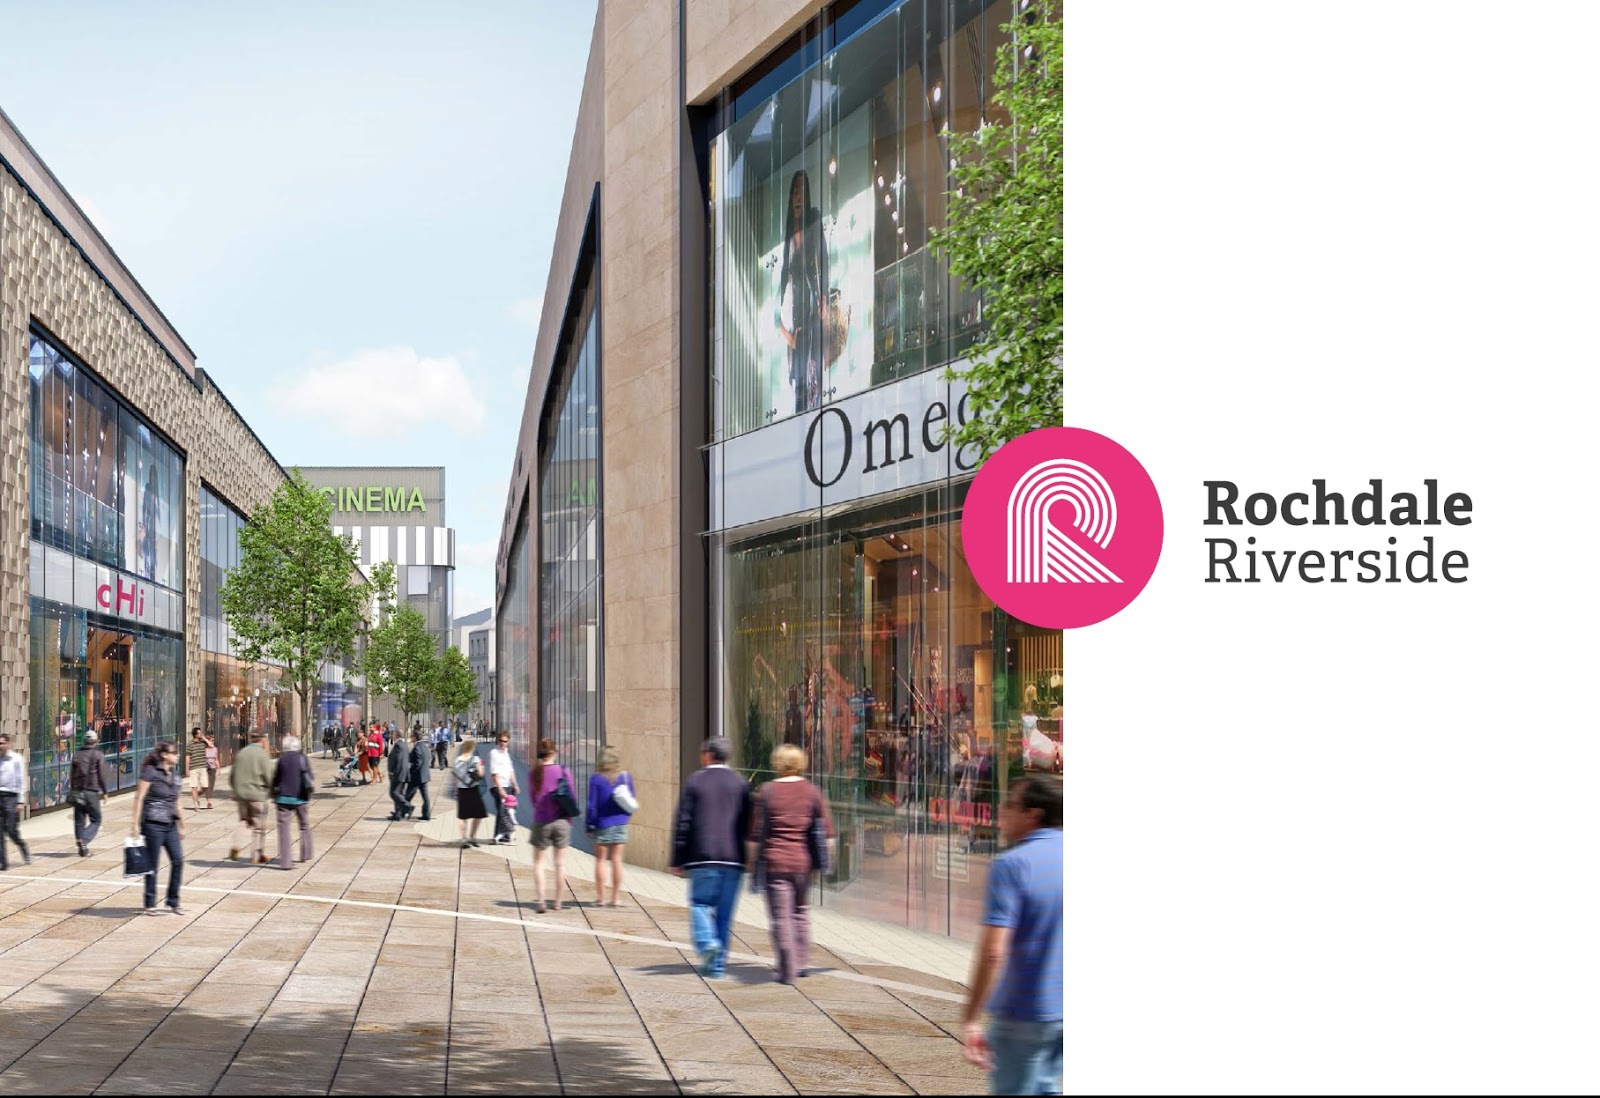 Image: The Reel Deal: cinema signs up to Rochdale’s retail and leisure development